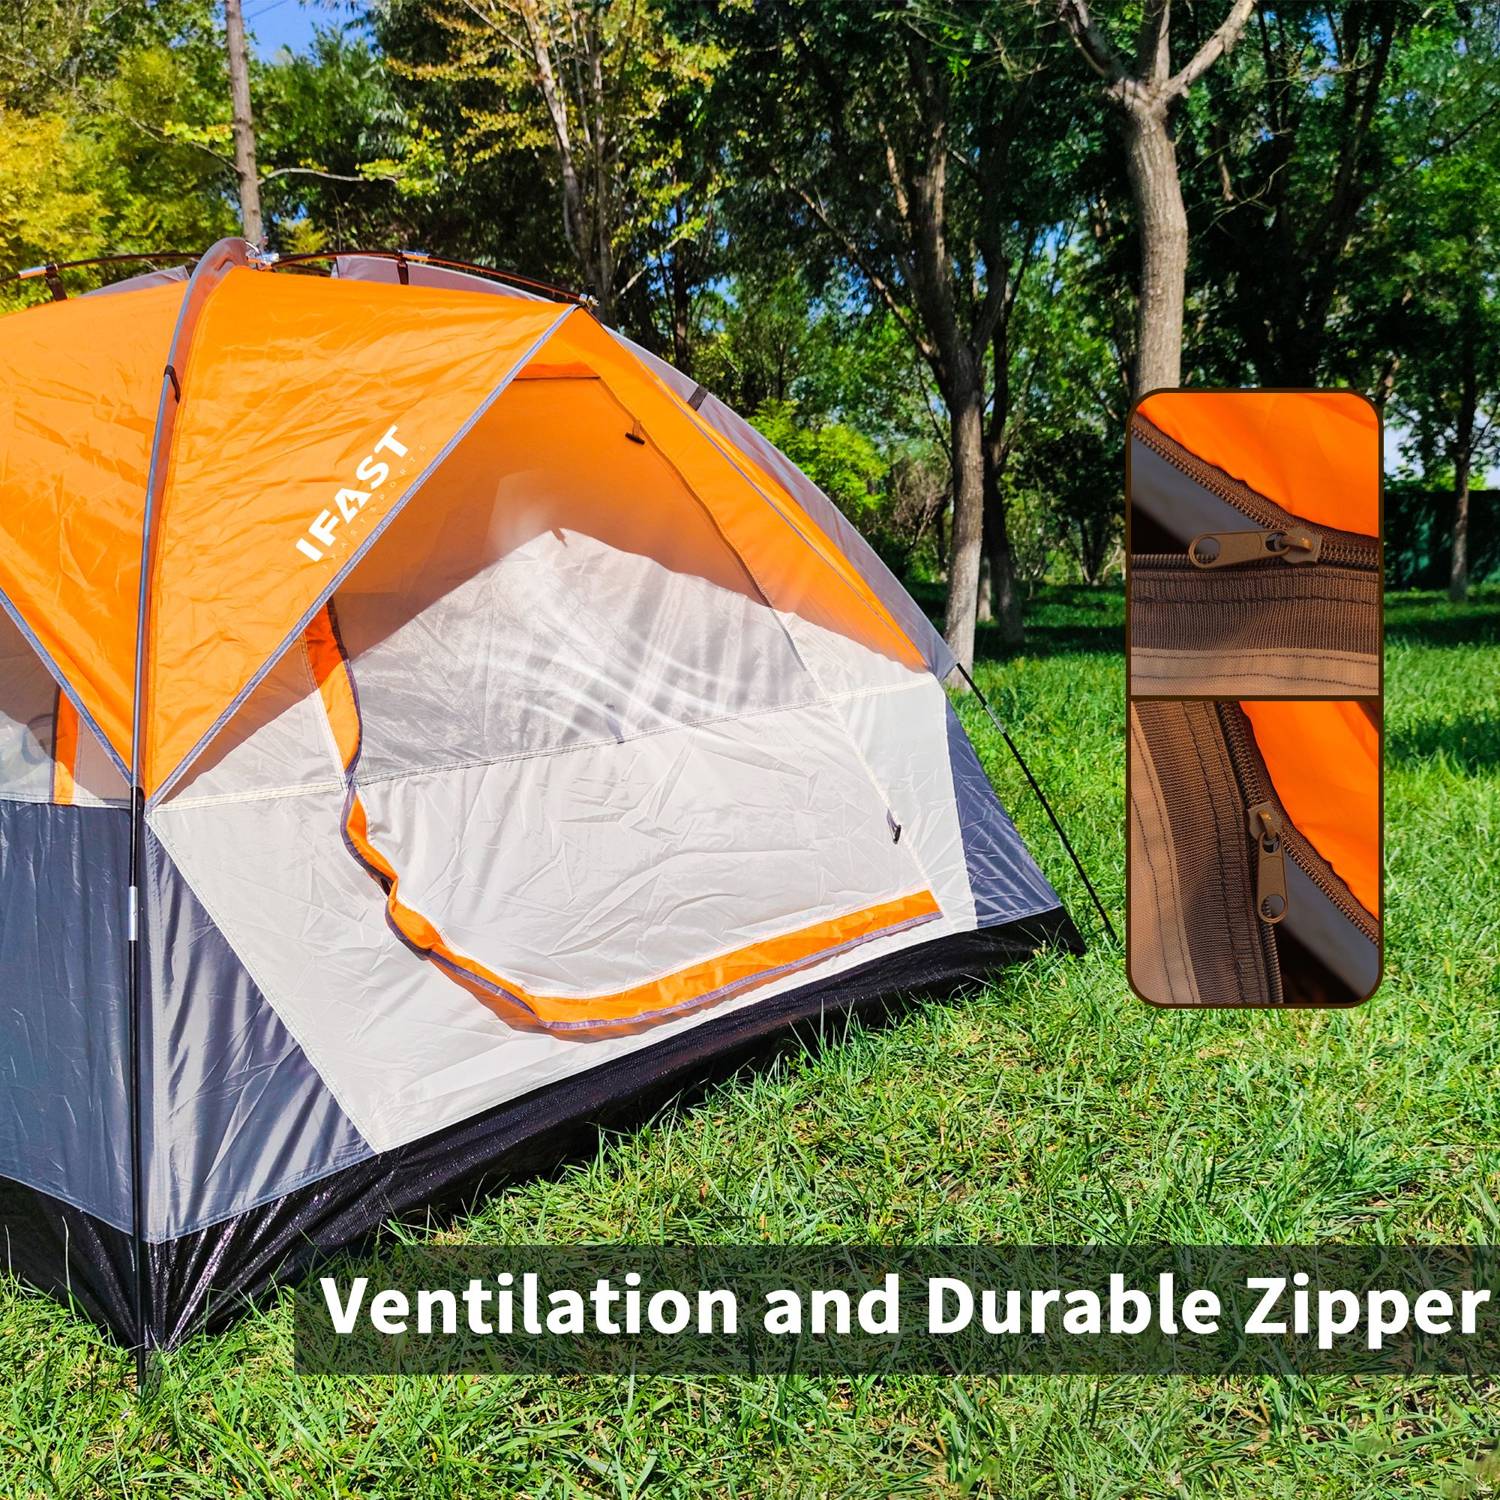 IFAST camping tent with durable zipper